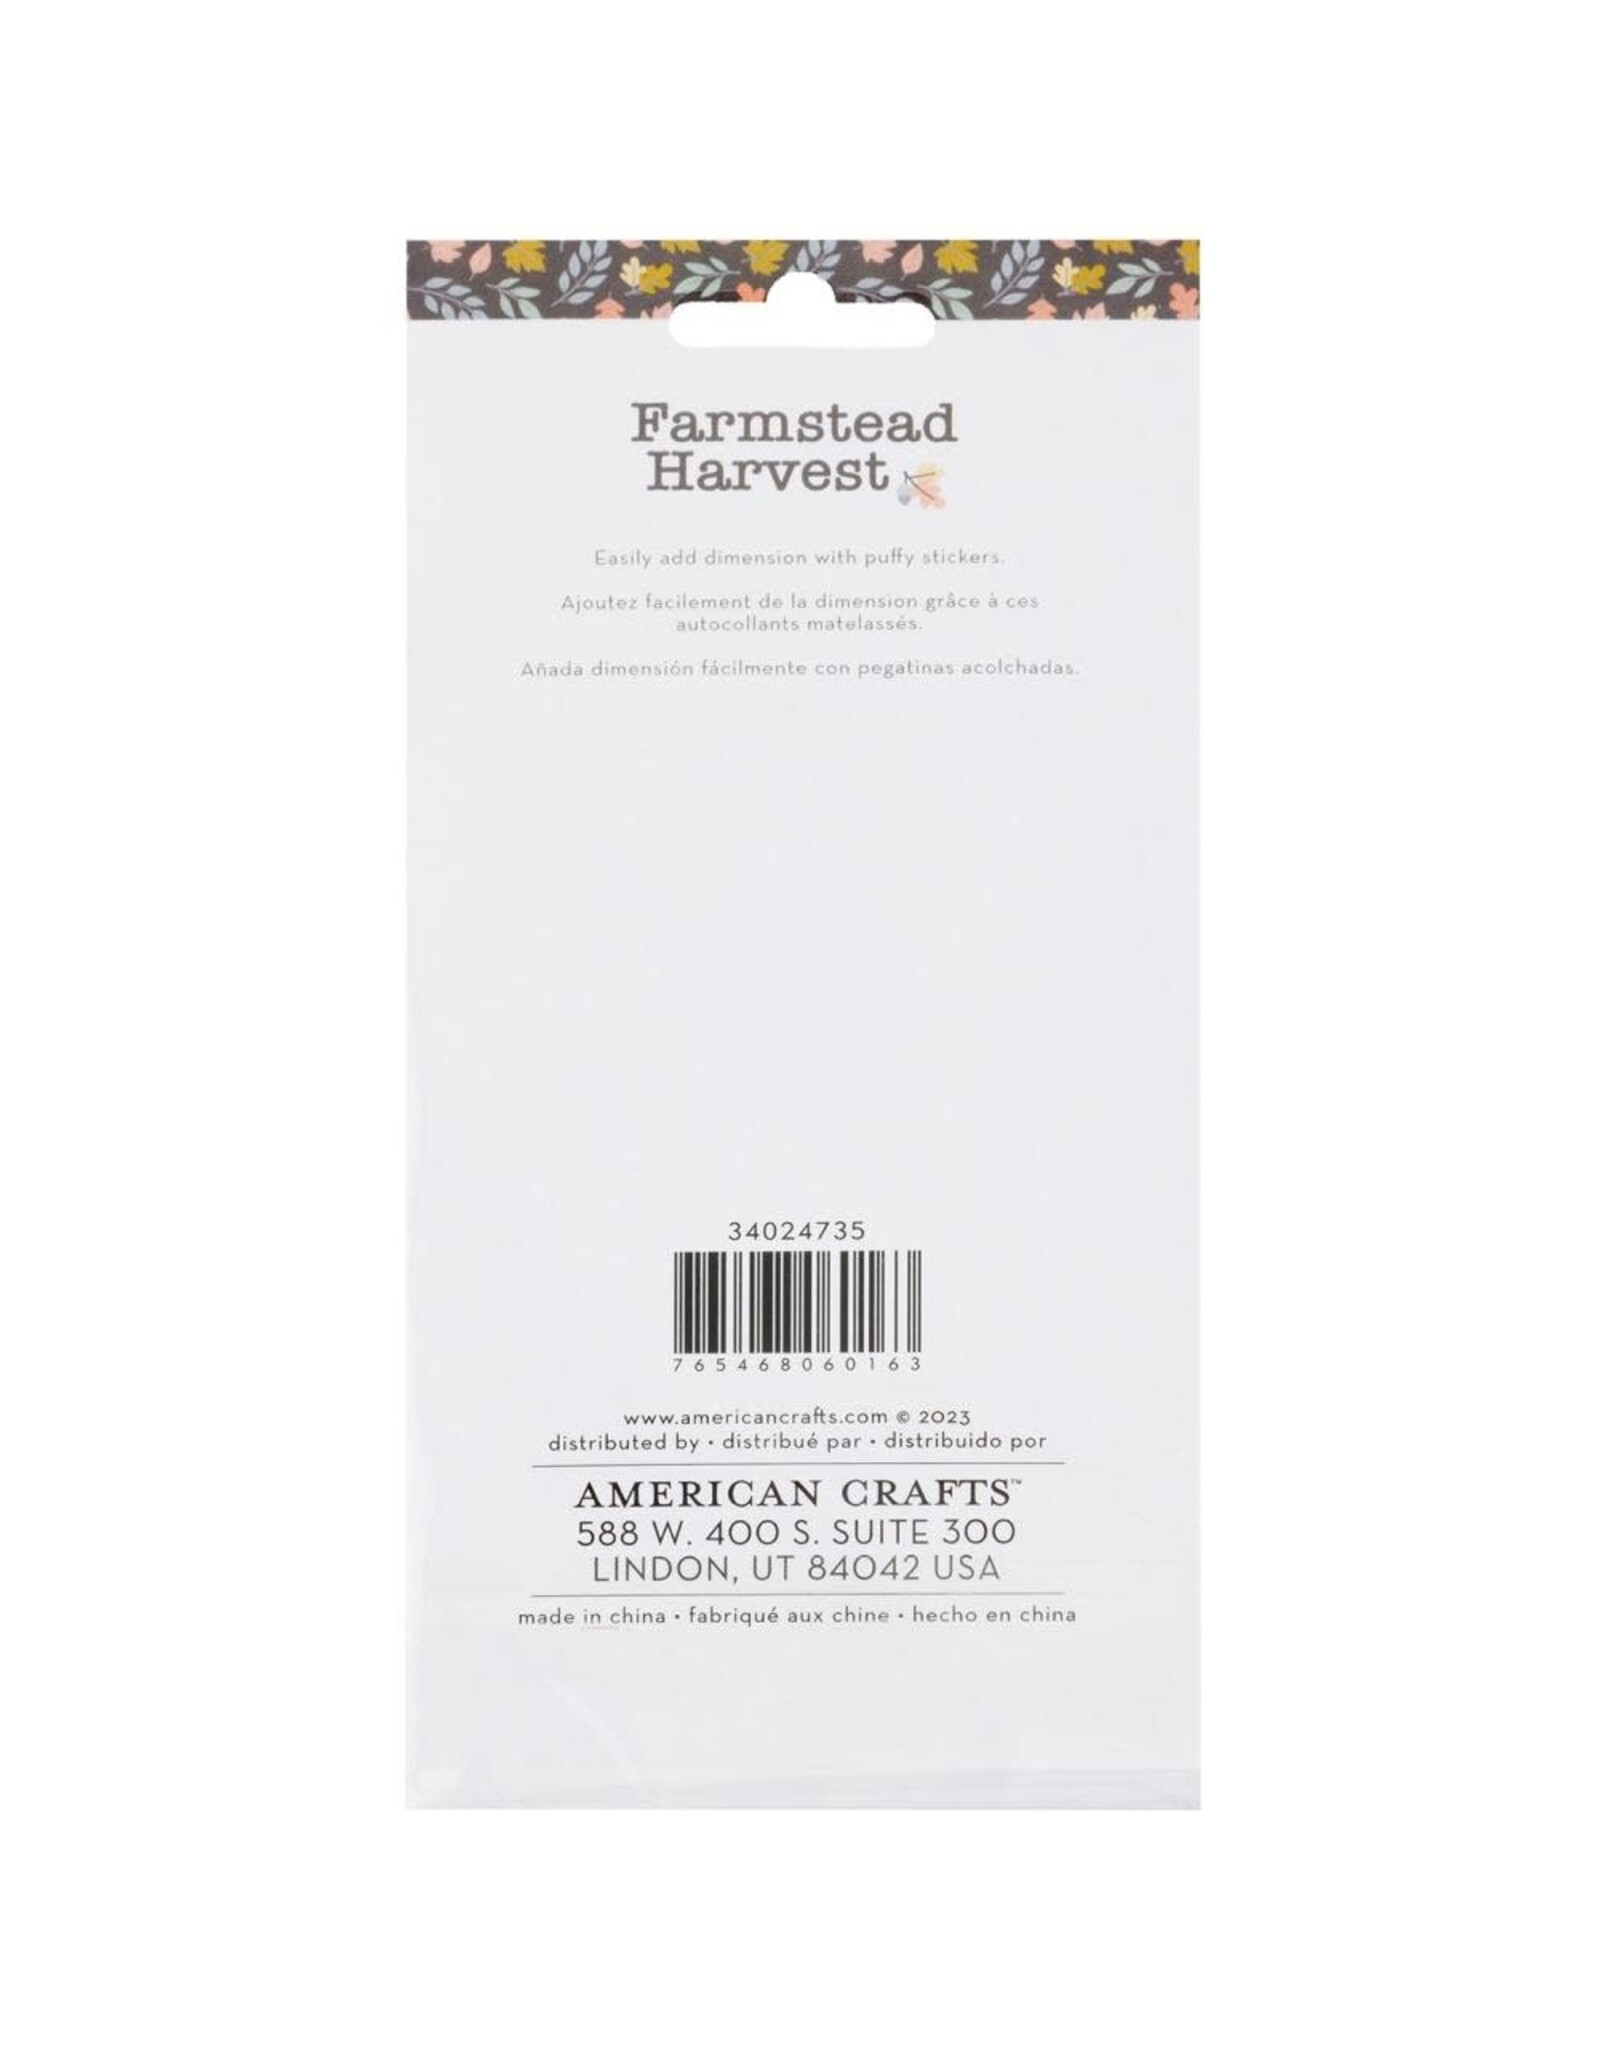 AMERICAN CRAFTS AMERICAN CRAFTS FARMSTEAD HARVEST PUFFY ALPHA STICKERS